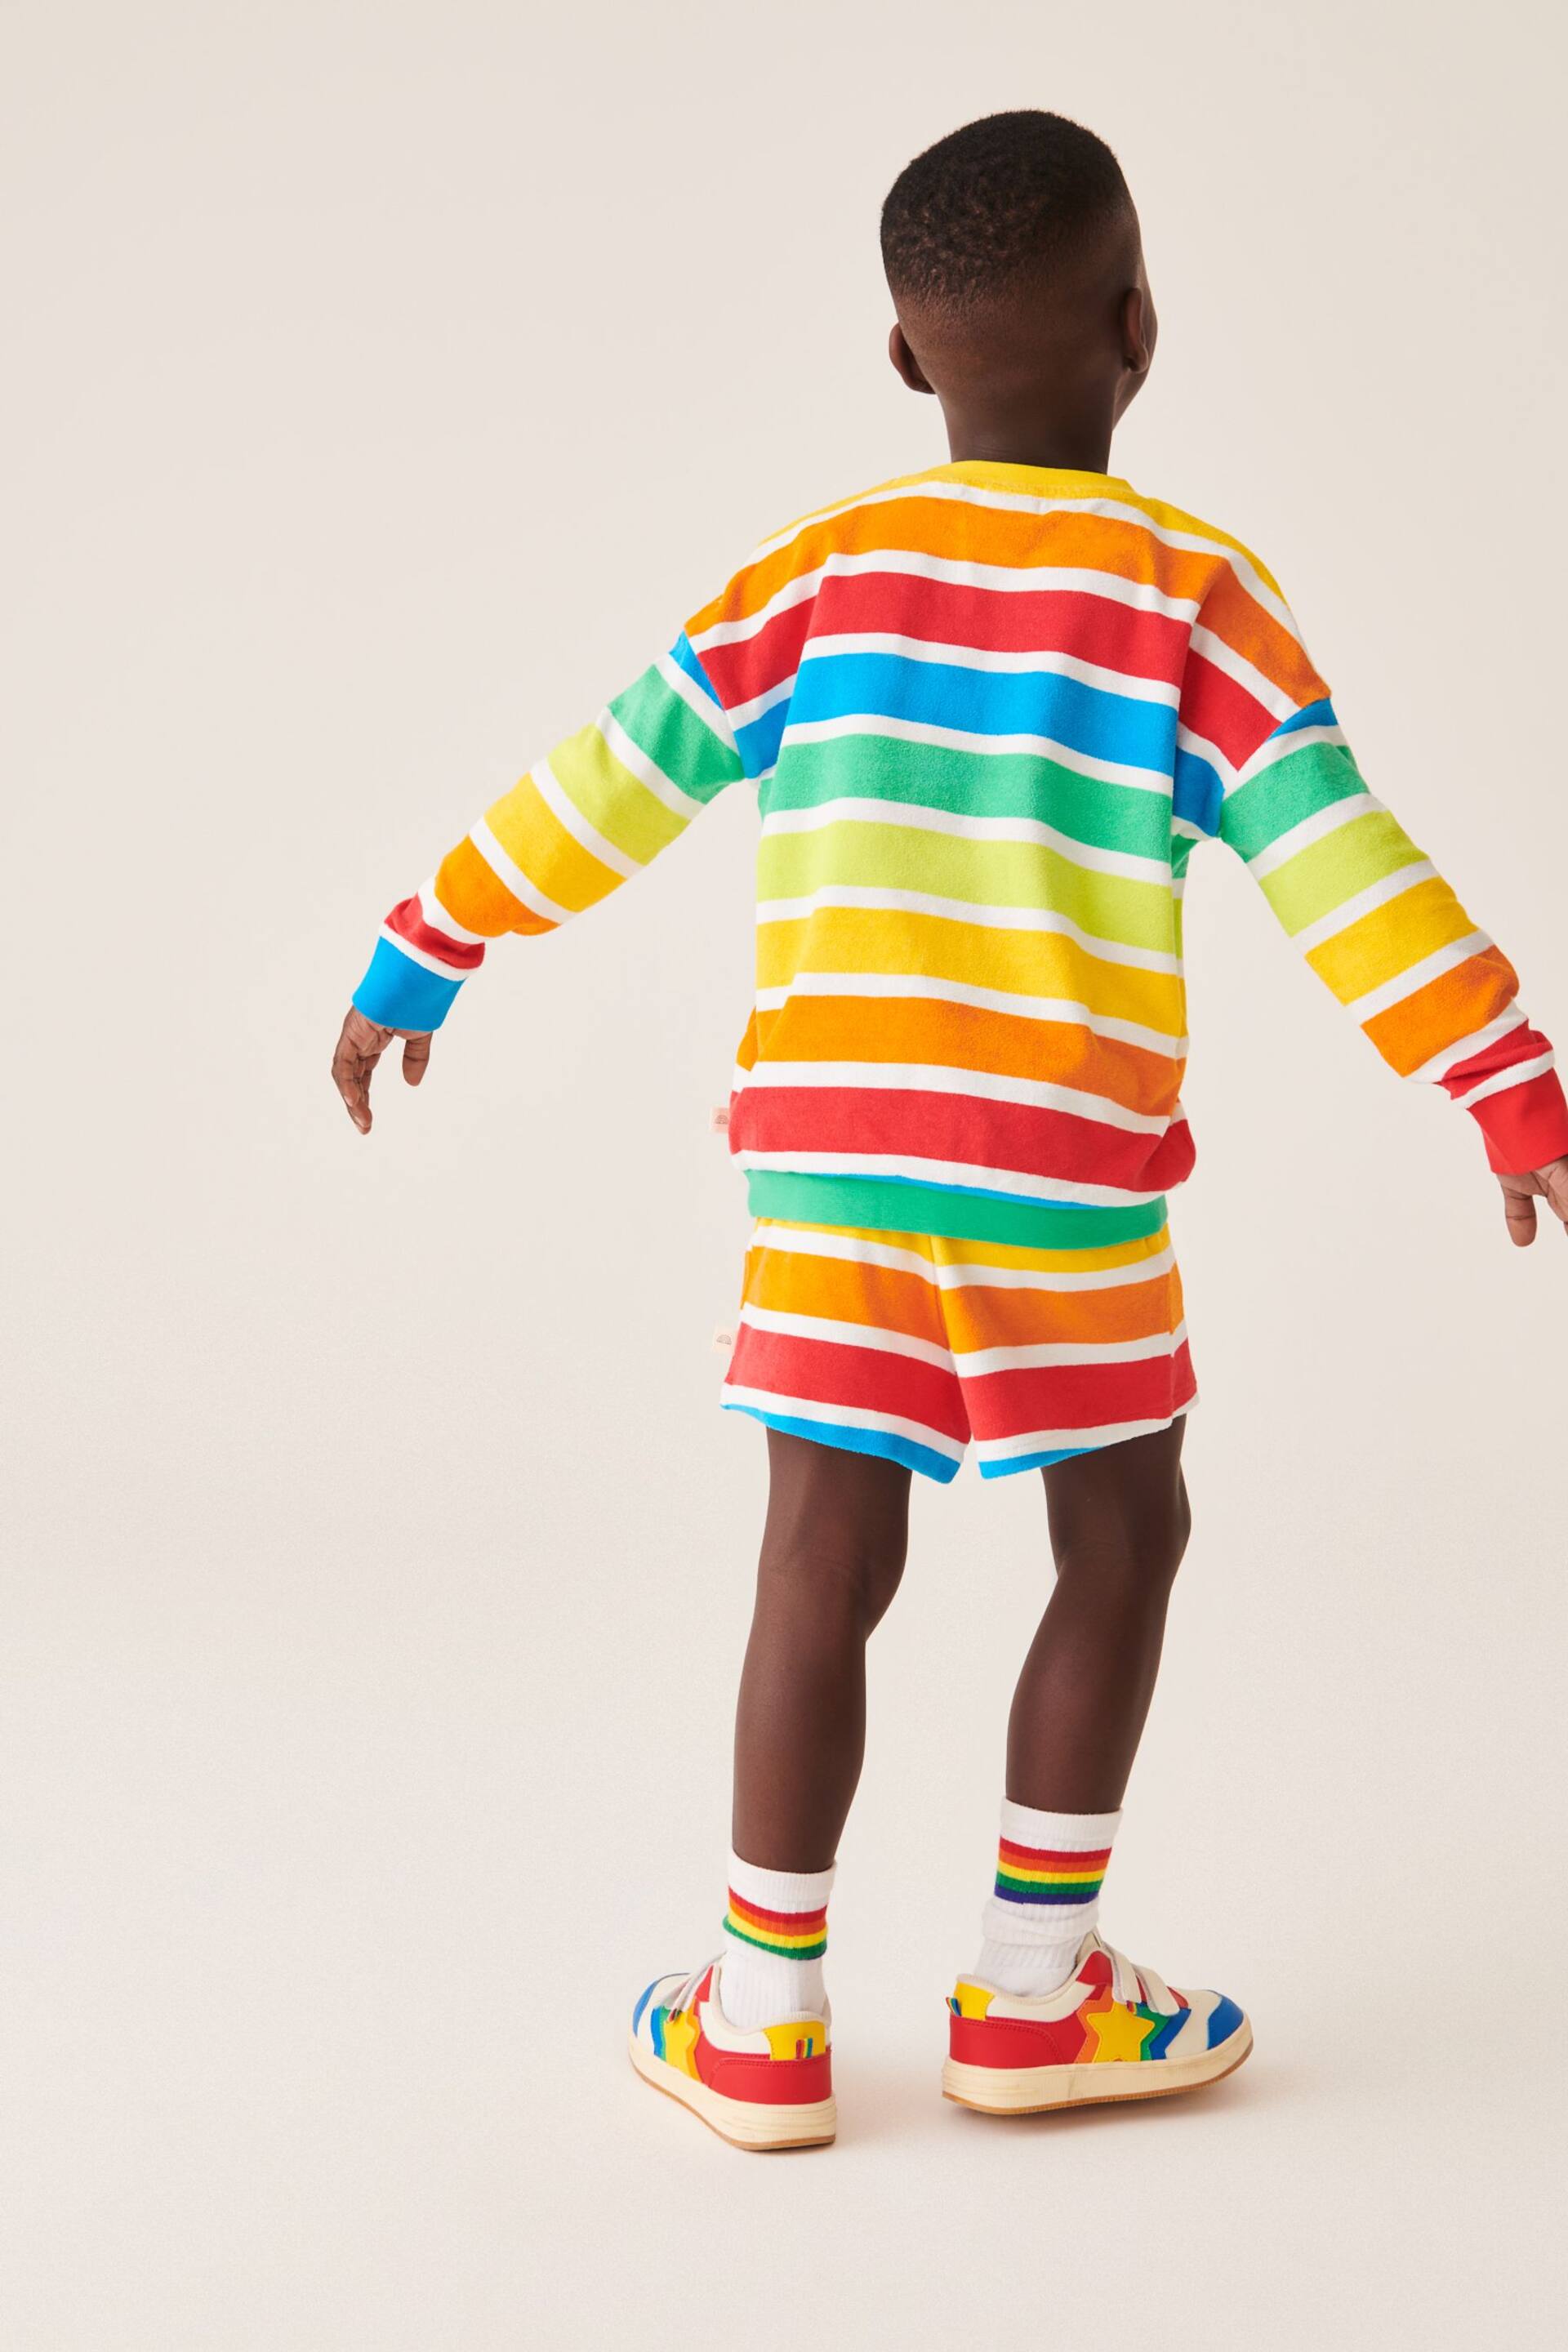 Little Bird by Jools Oliver Multi Bright Towelling Sweat Top and Short Set - Image 4 of 7